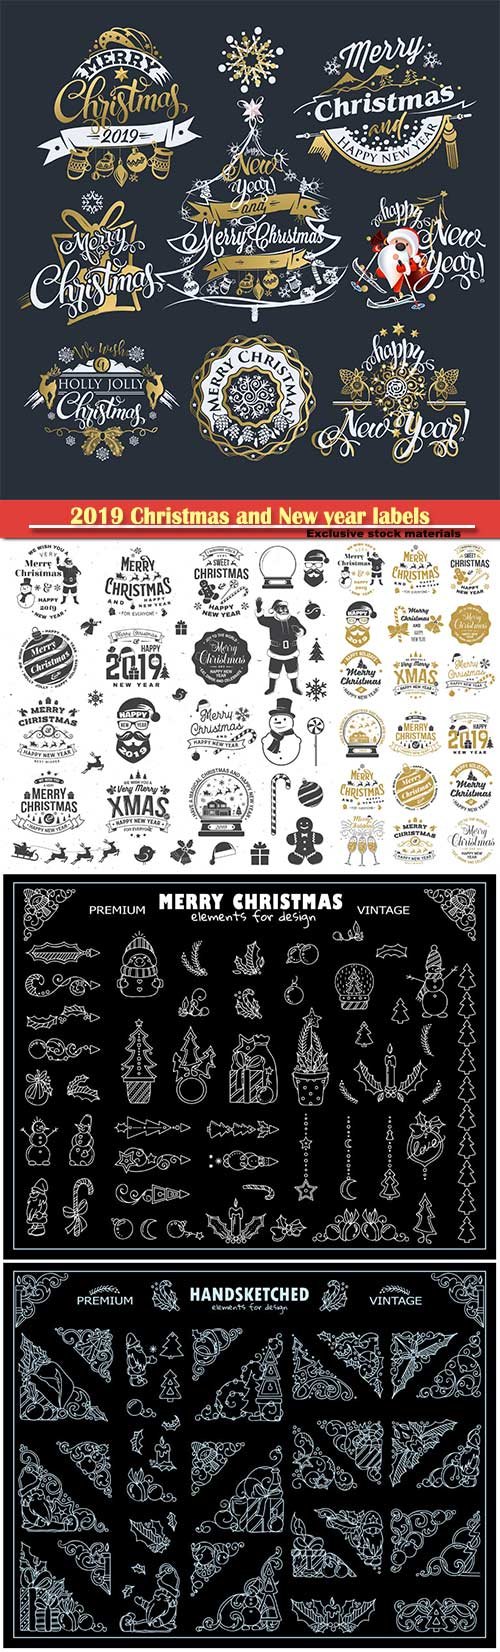 2019 Christmas and New year labels and decoration vector borders